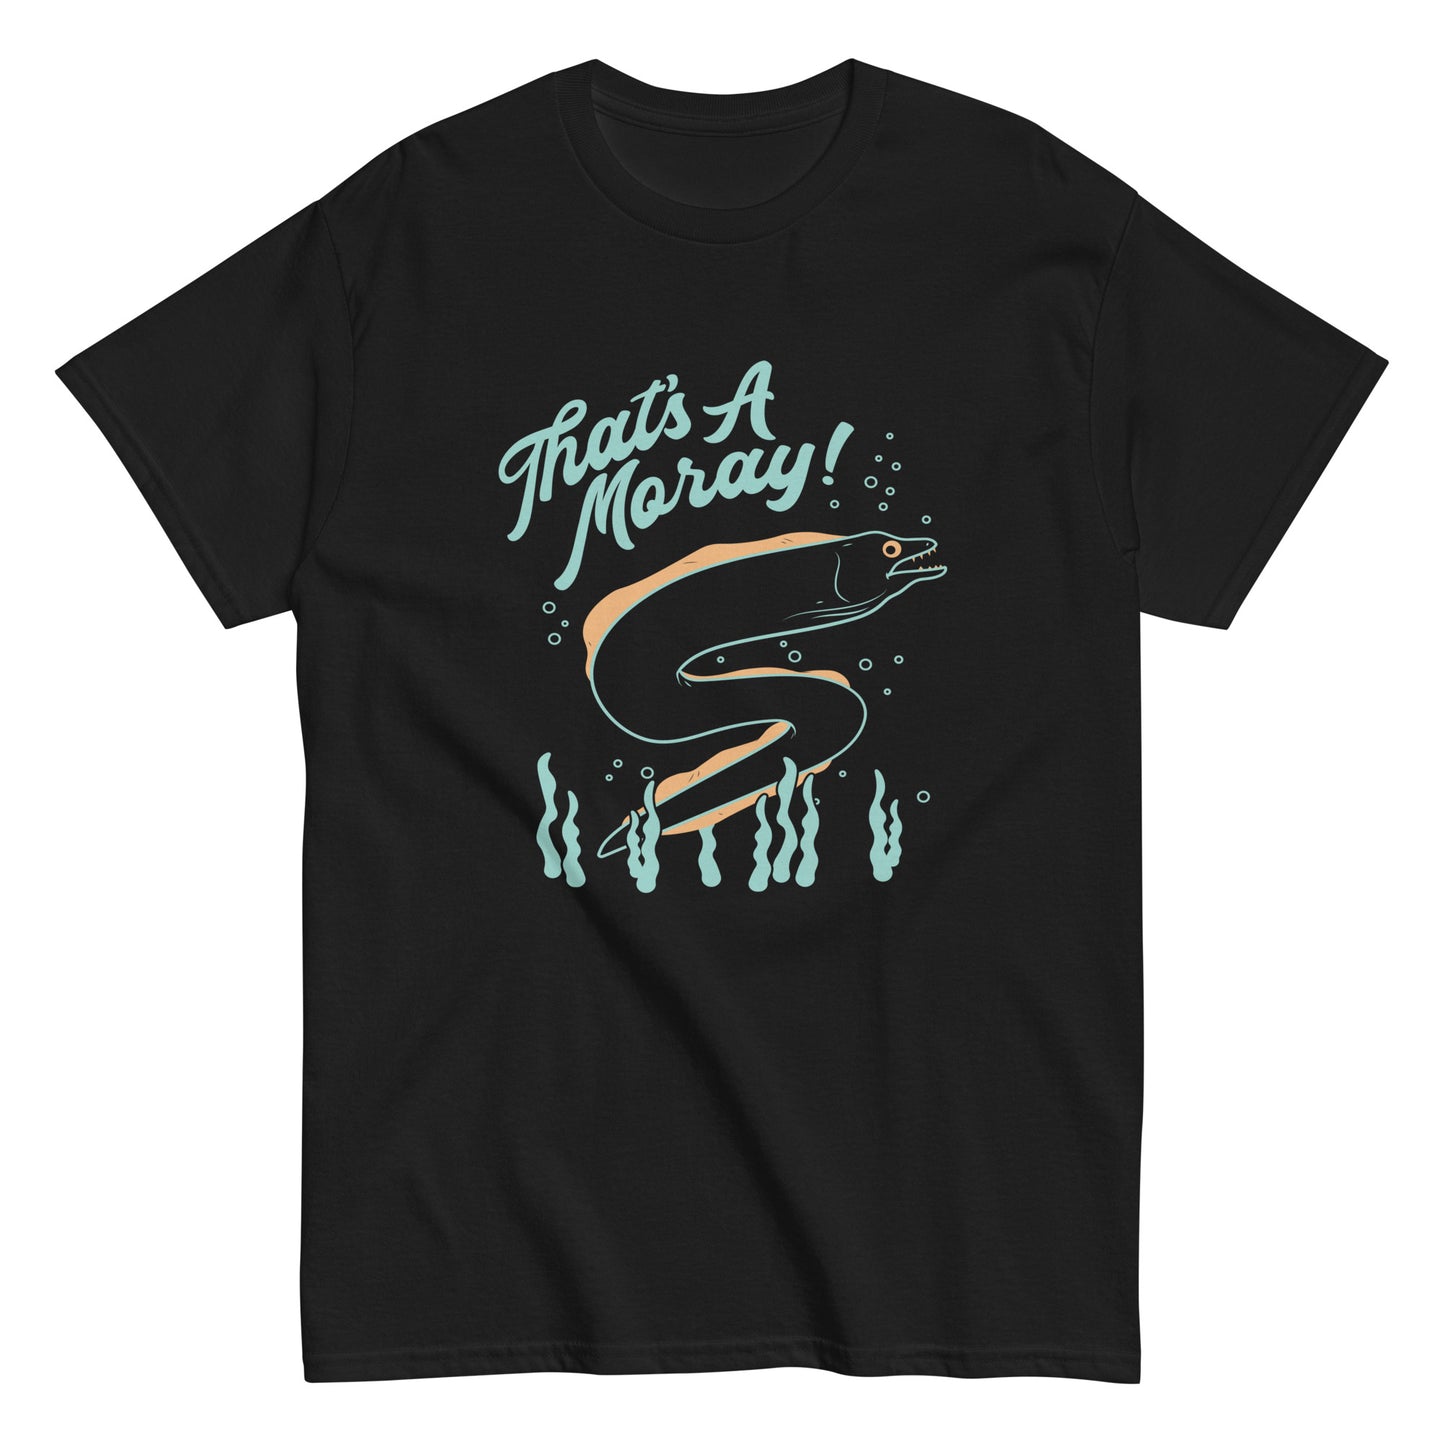 That's A Moray! Men's Classic Tee